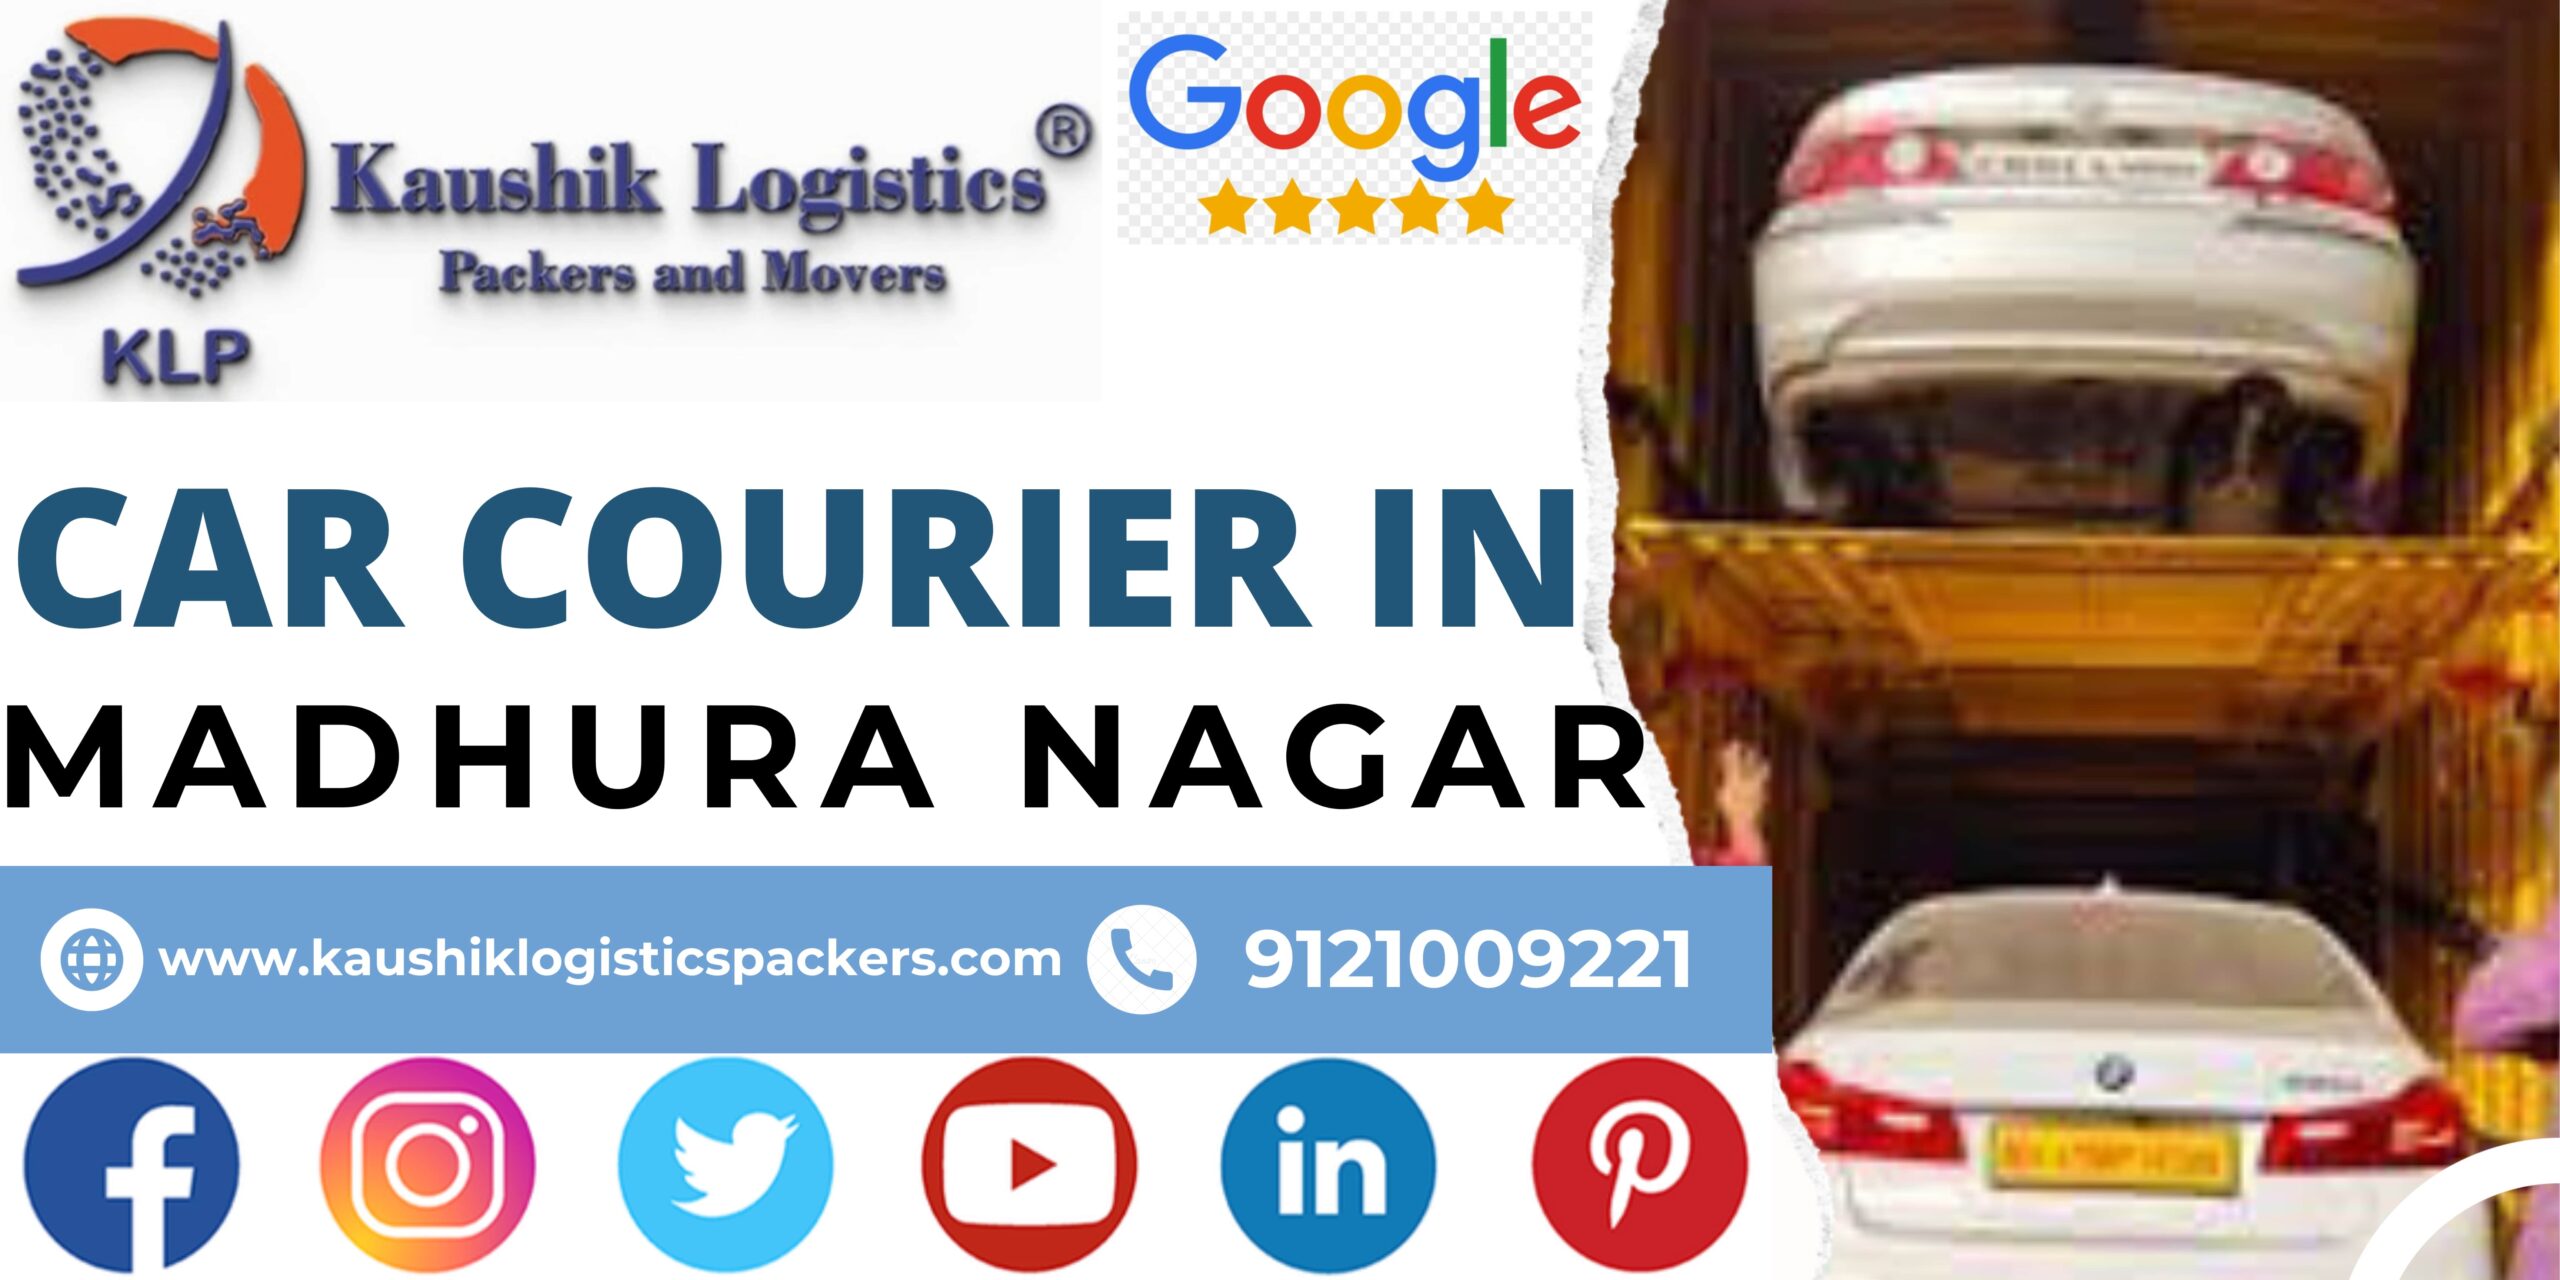 Packers and Movers In Madhura Nagar